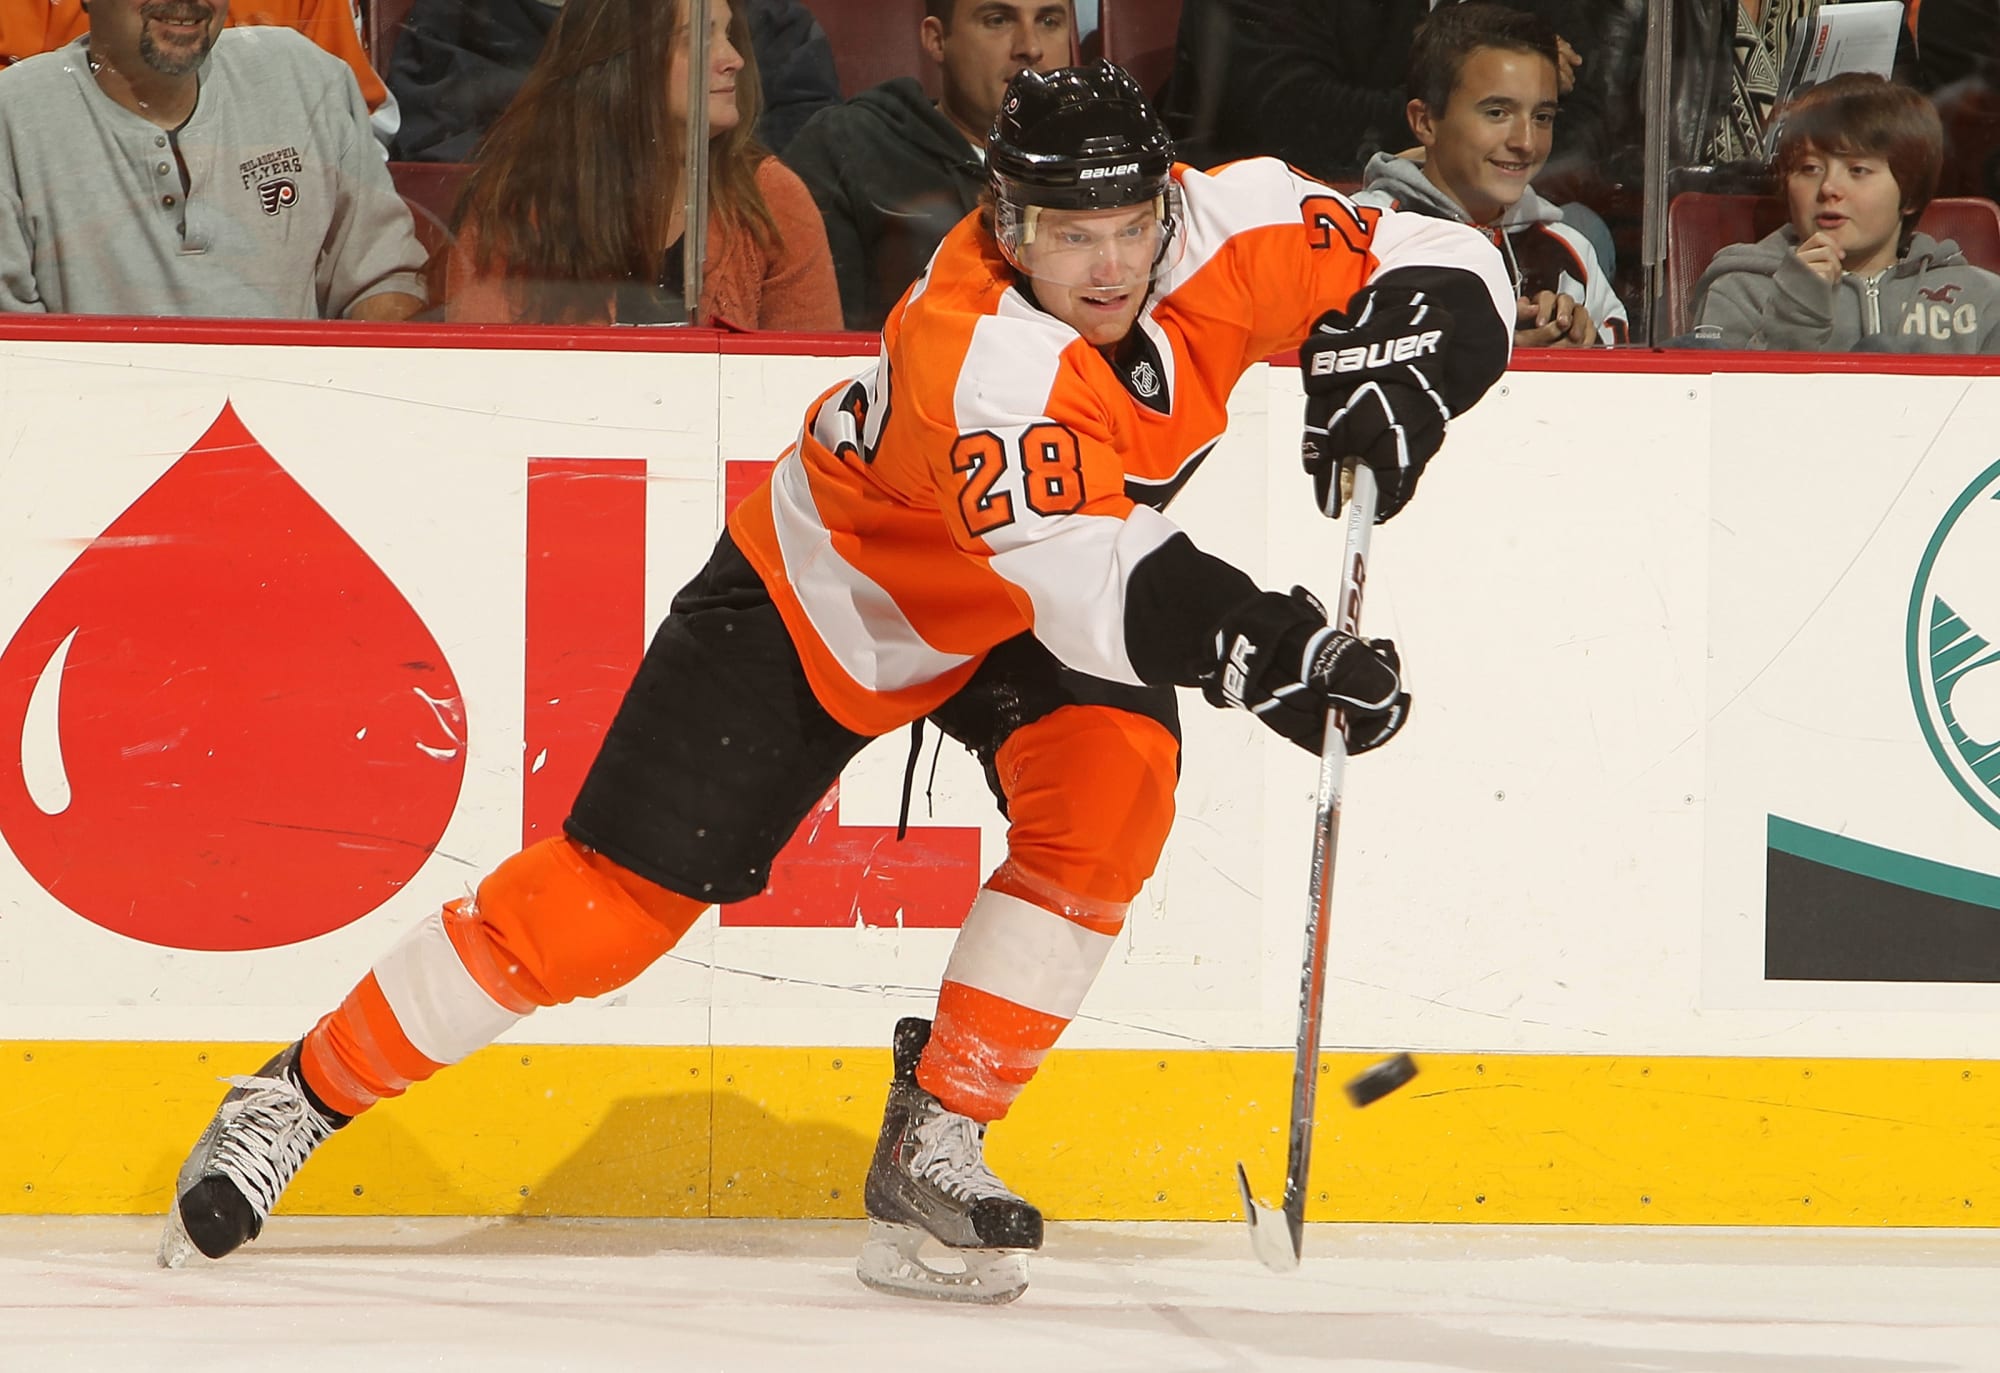 Giroux following in Briere's playoff footsteps